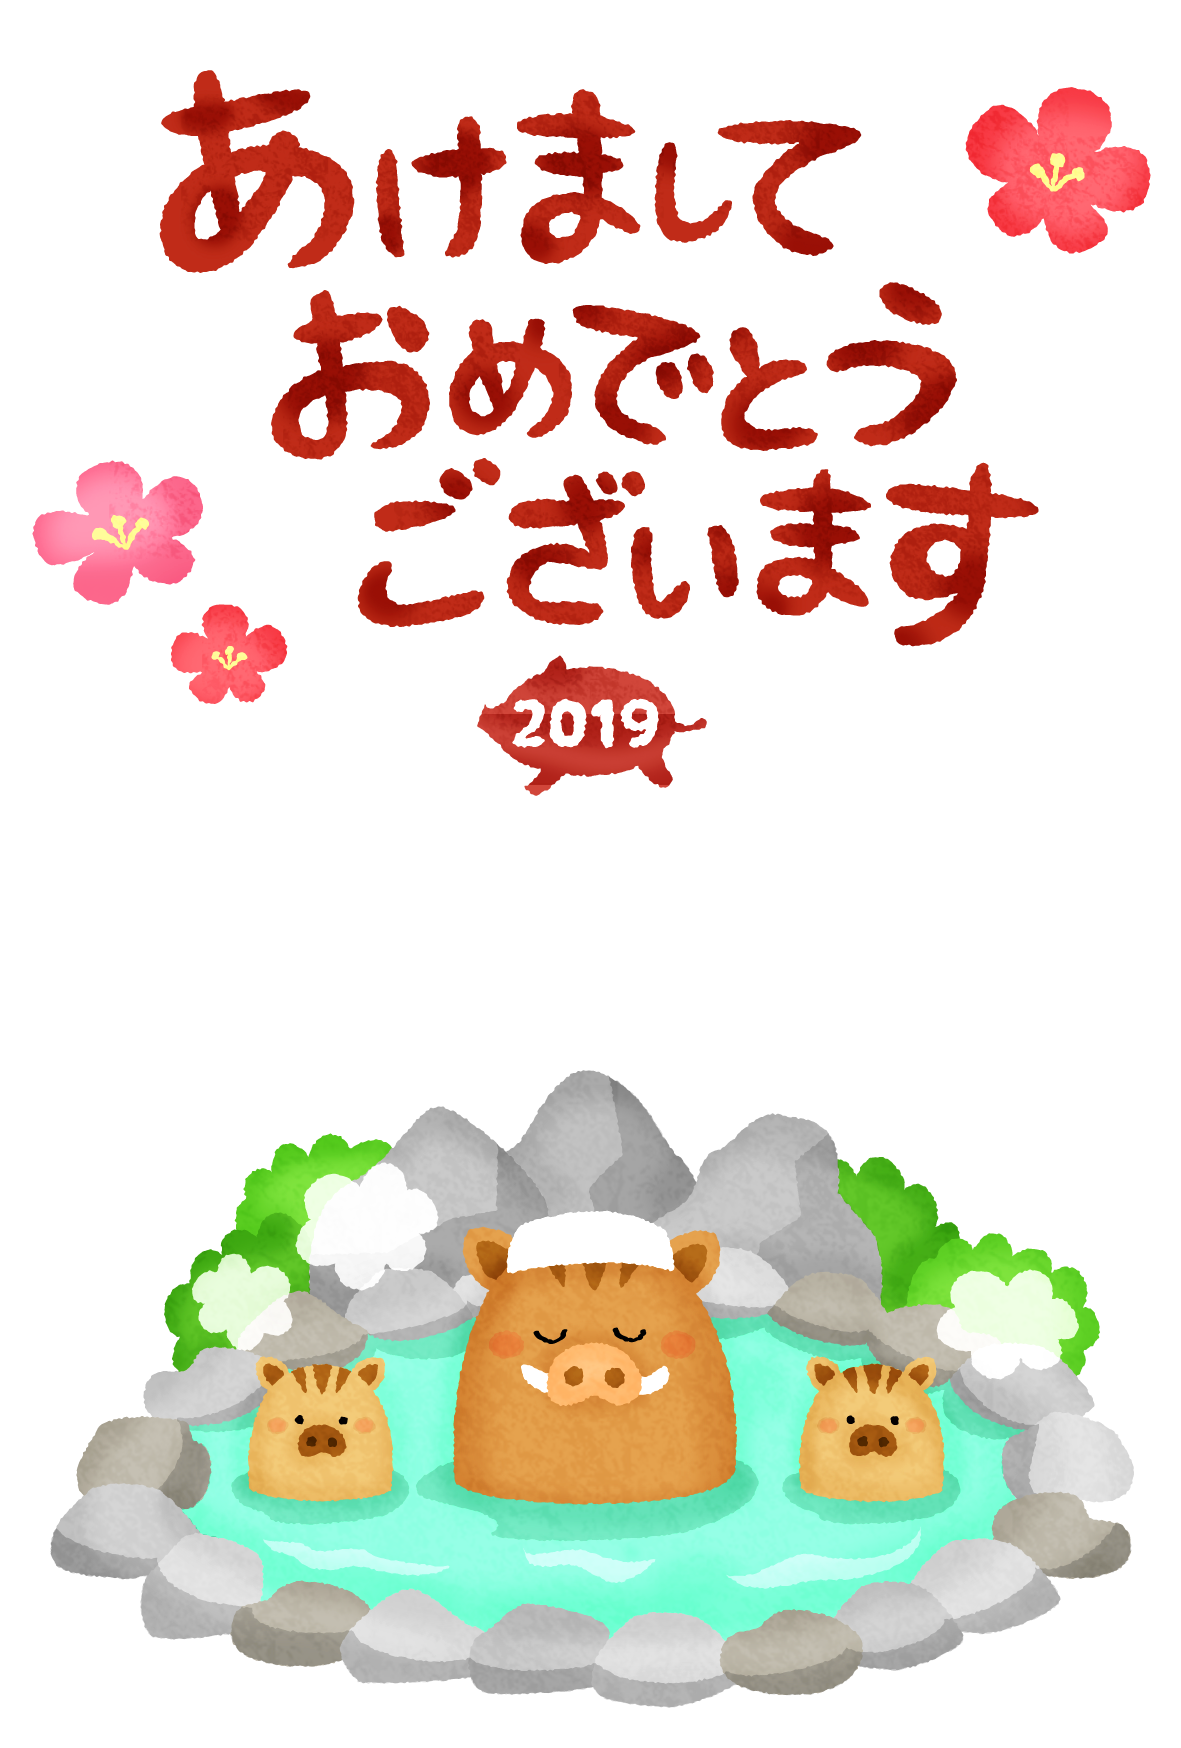 template-new-years-card-2019-hot-spring-boars.png